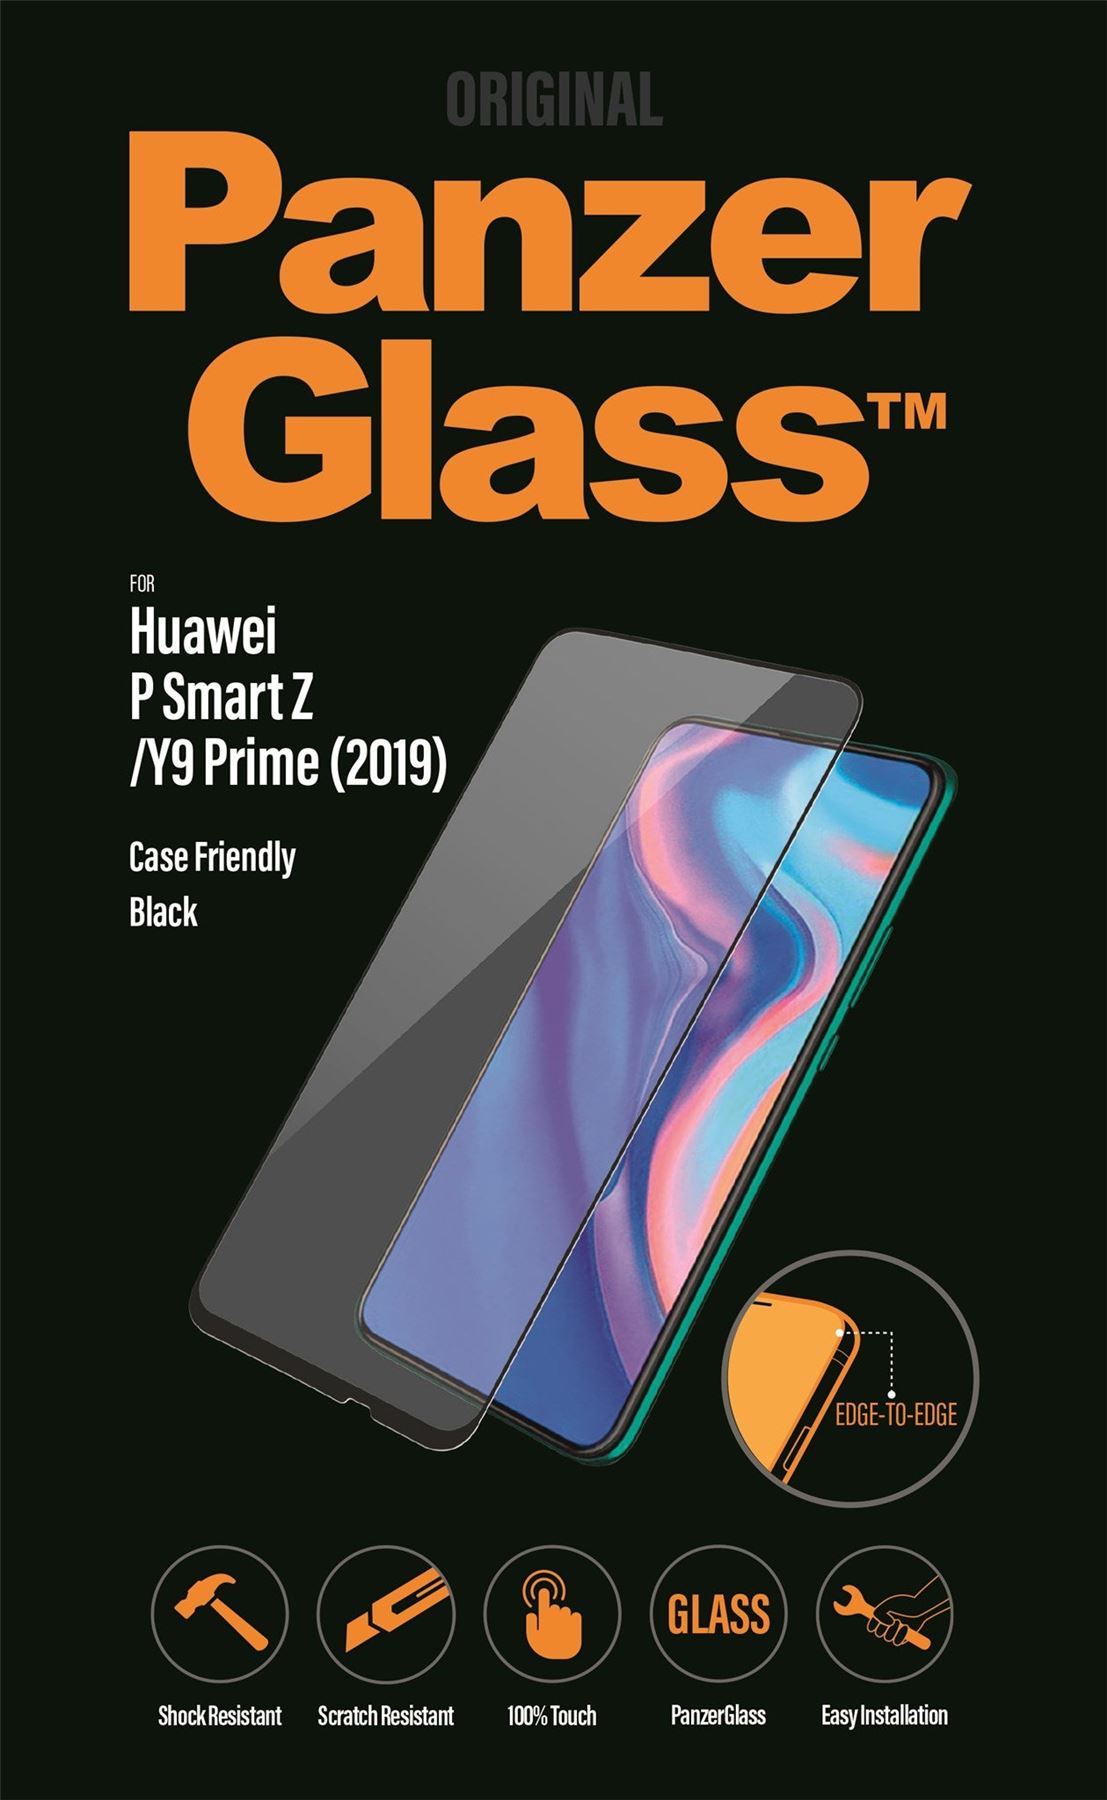 Official Panzer Glass Black for Huawei P Smart Z/Y9 Prime 2019 - PZ5350